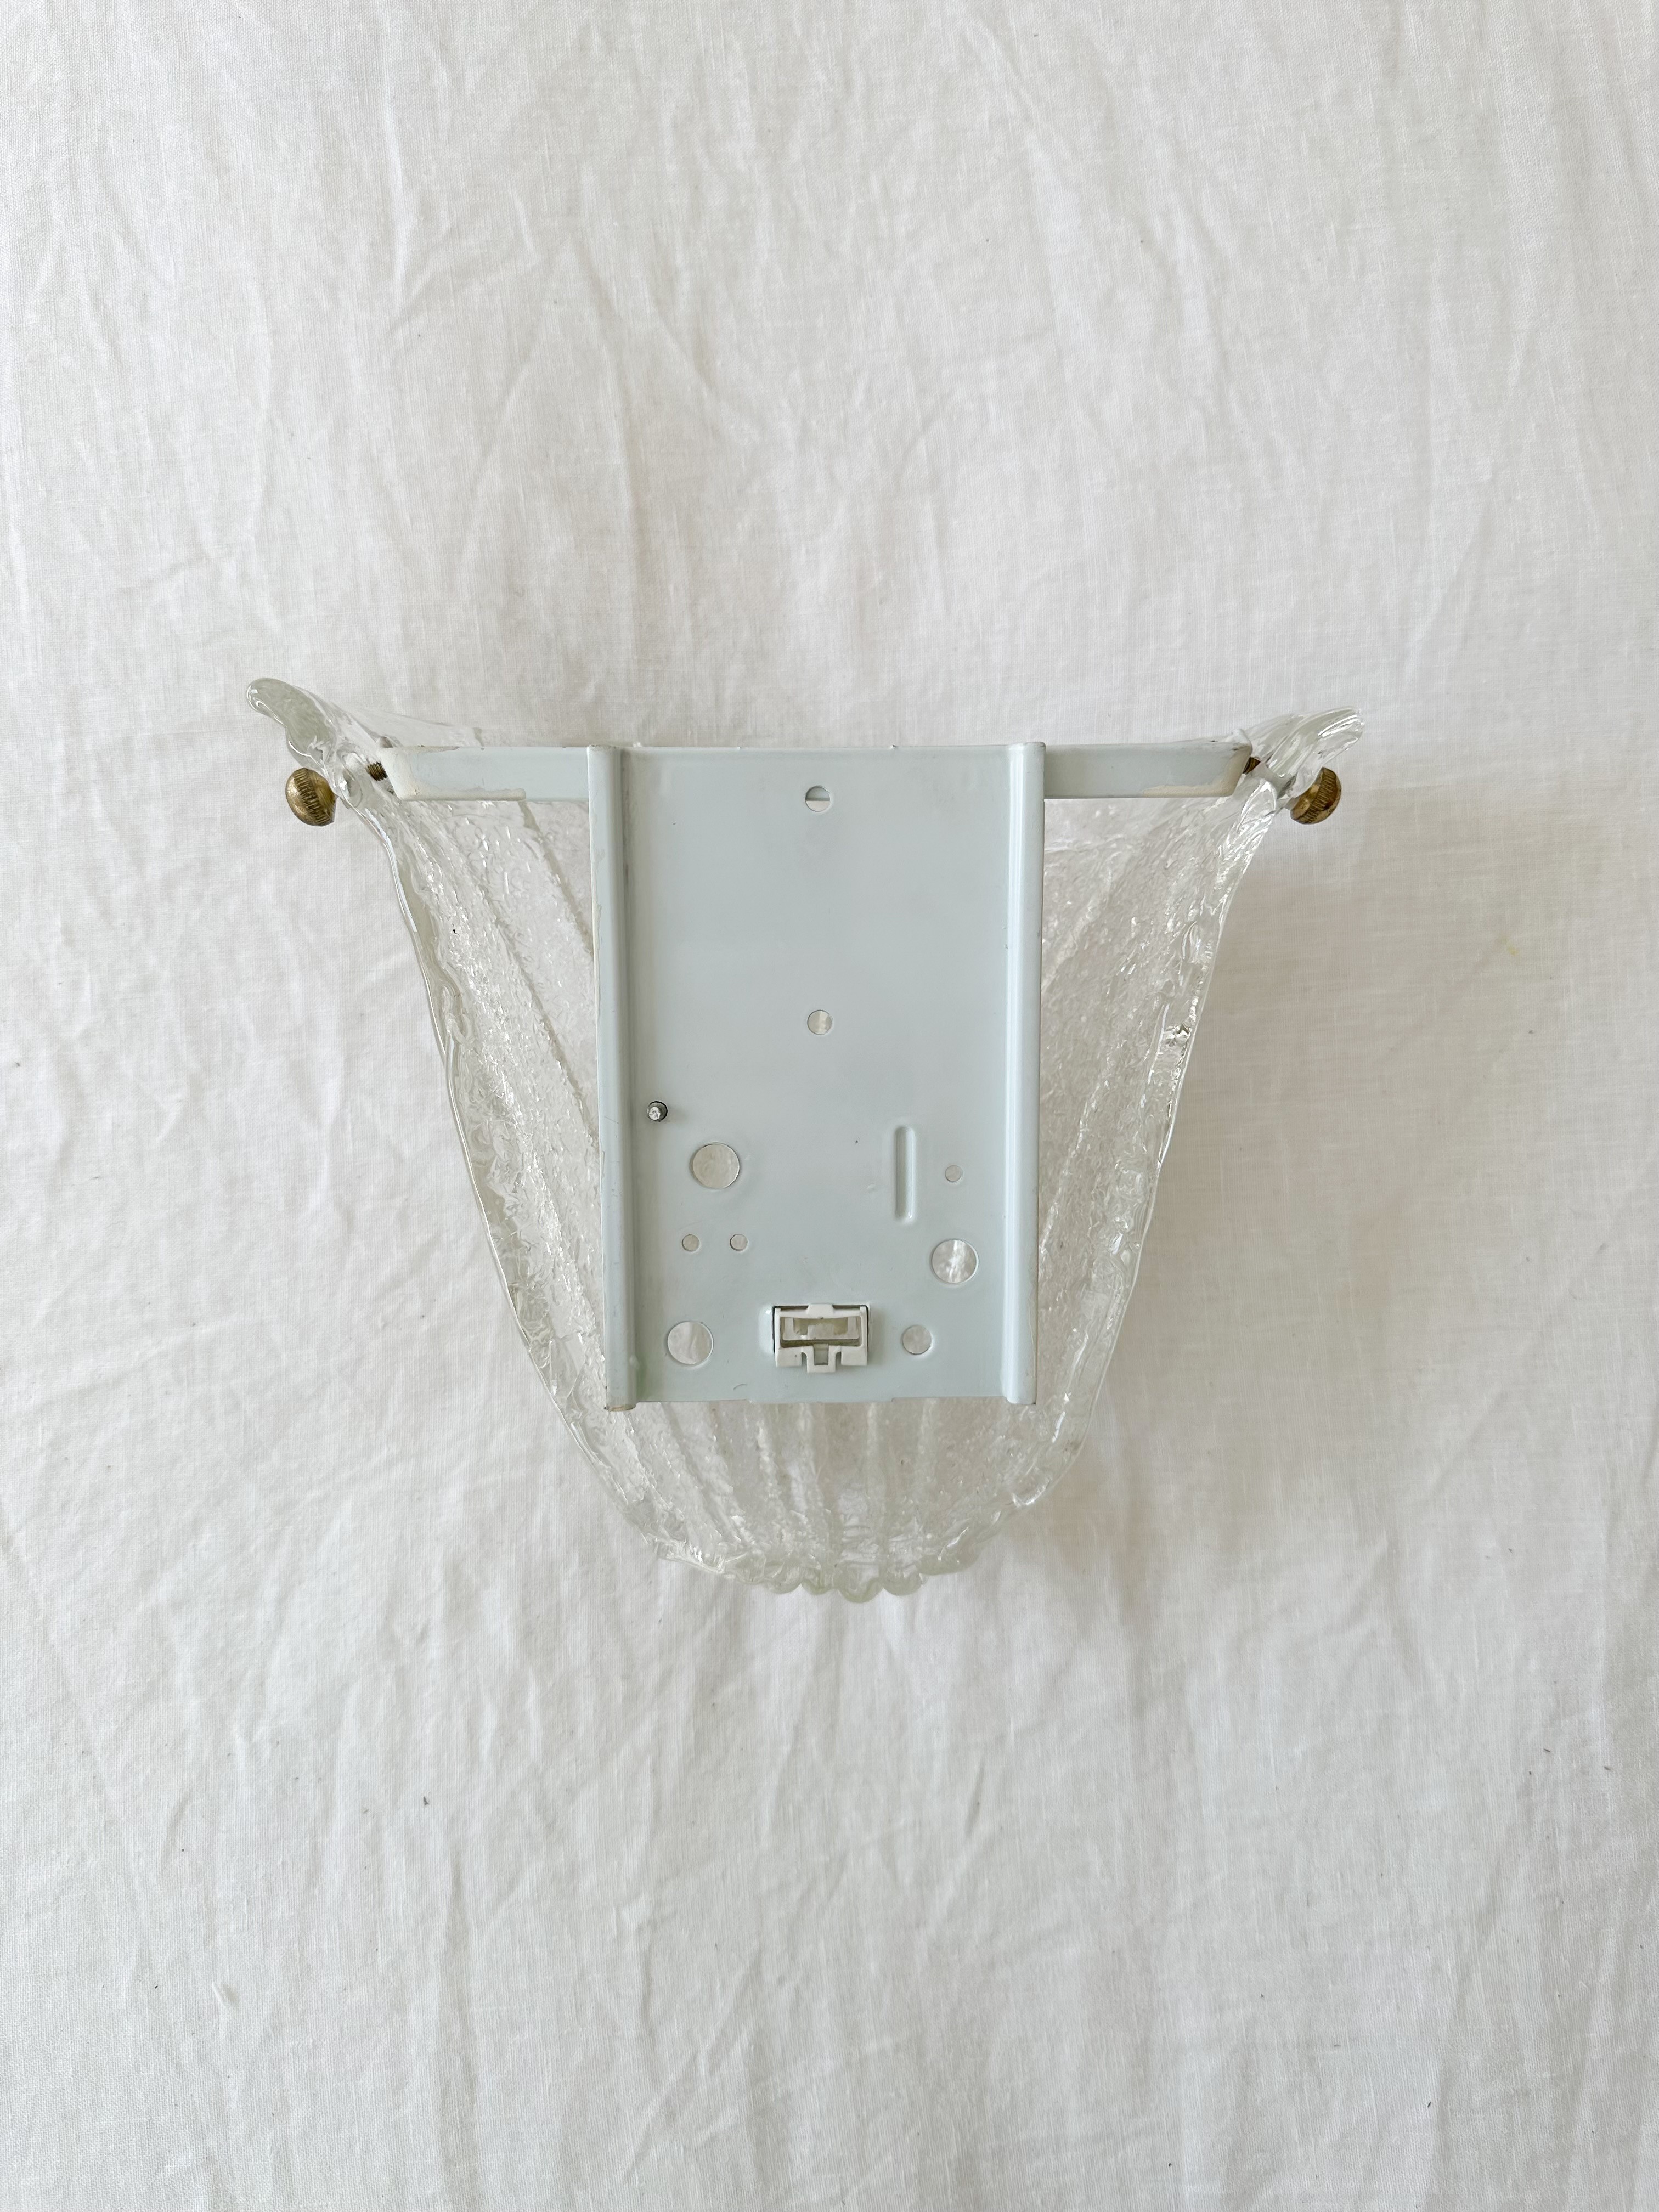 a white wall mounted electrical outlet with a white curtain